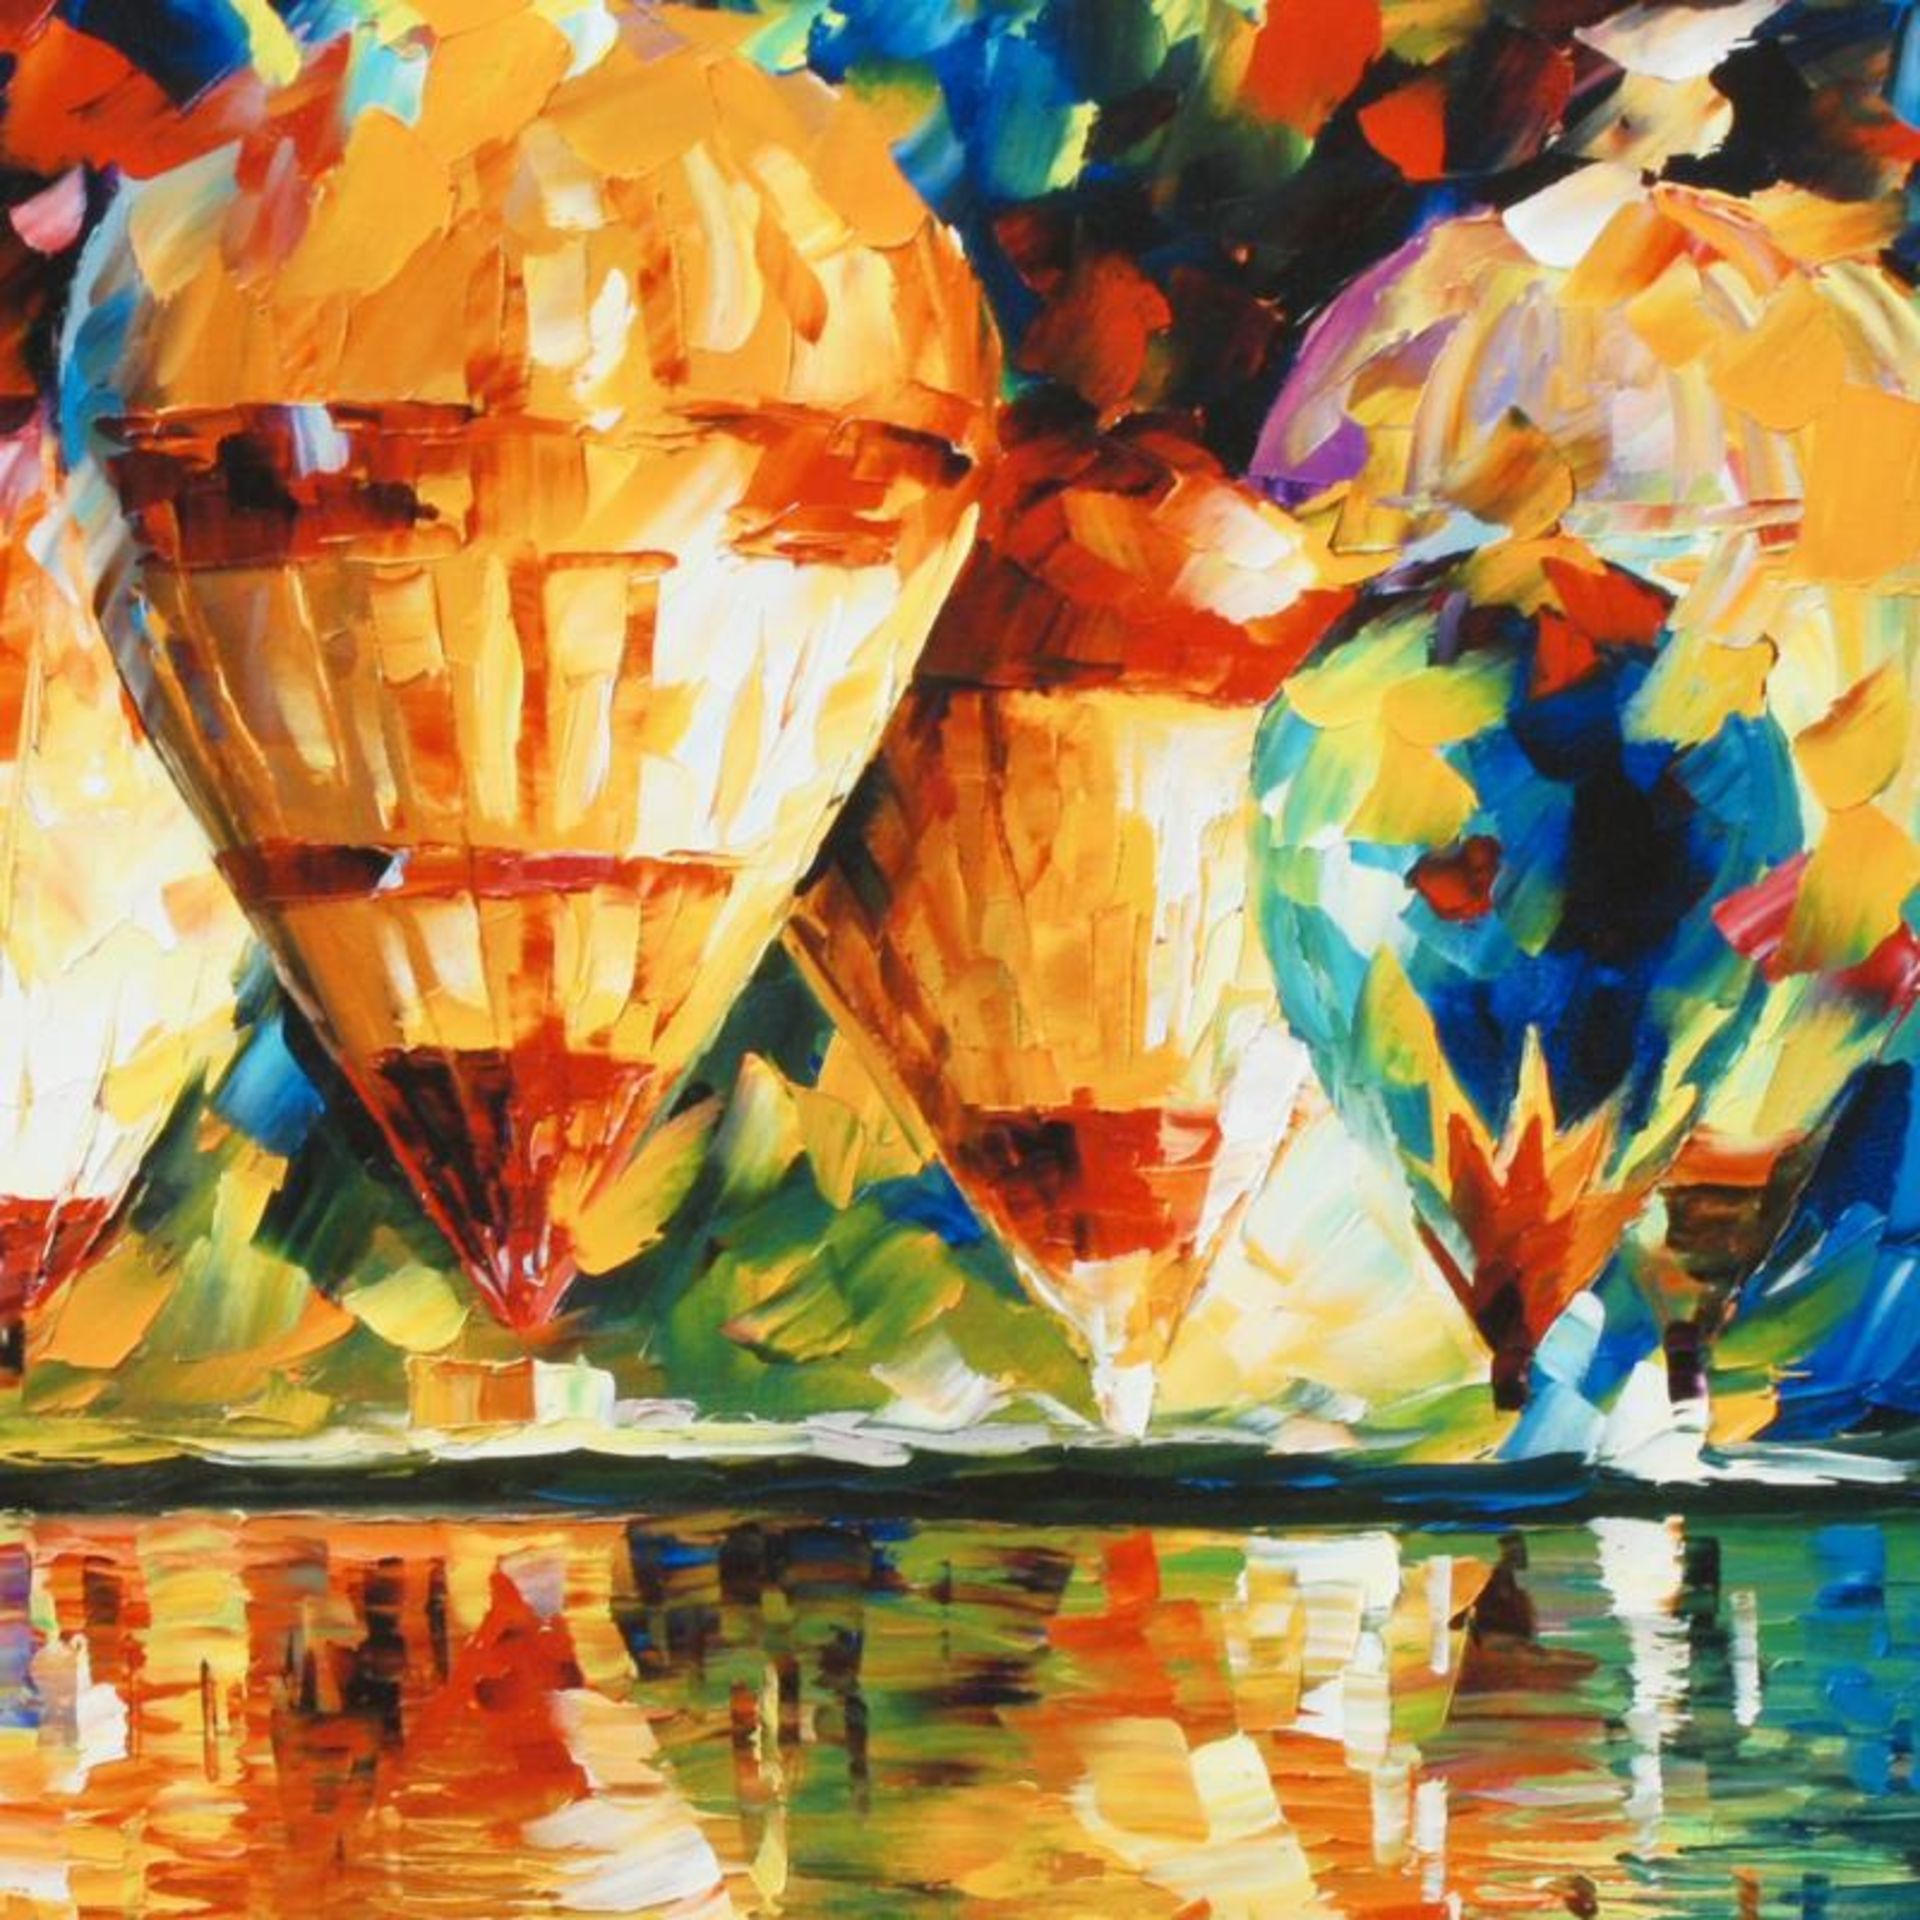 Balloon Show by Afremov (1955-2019) - Image 2 of 3